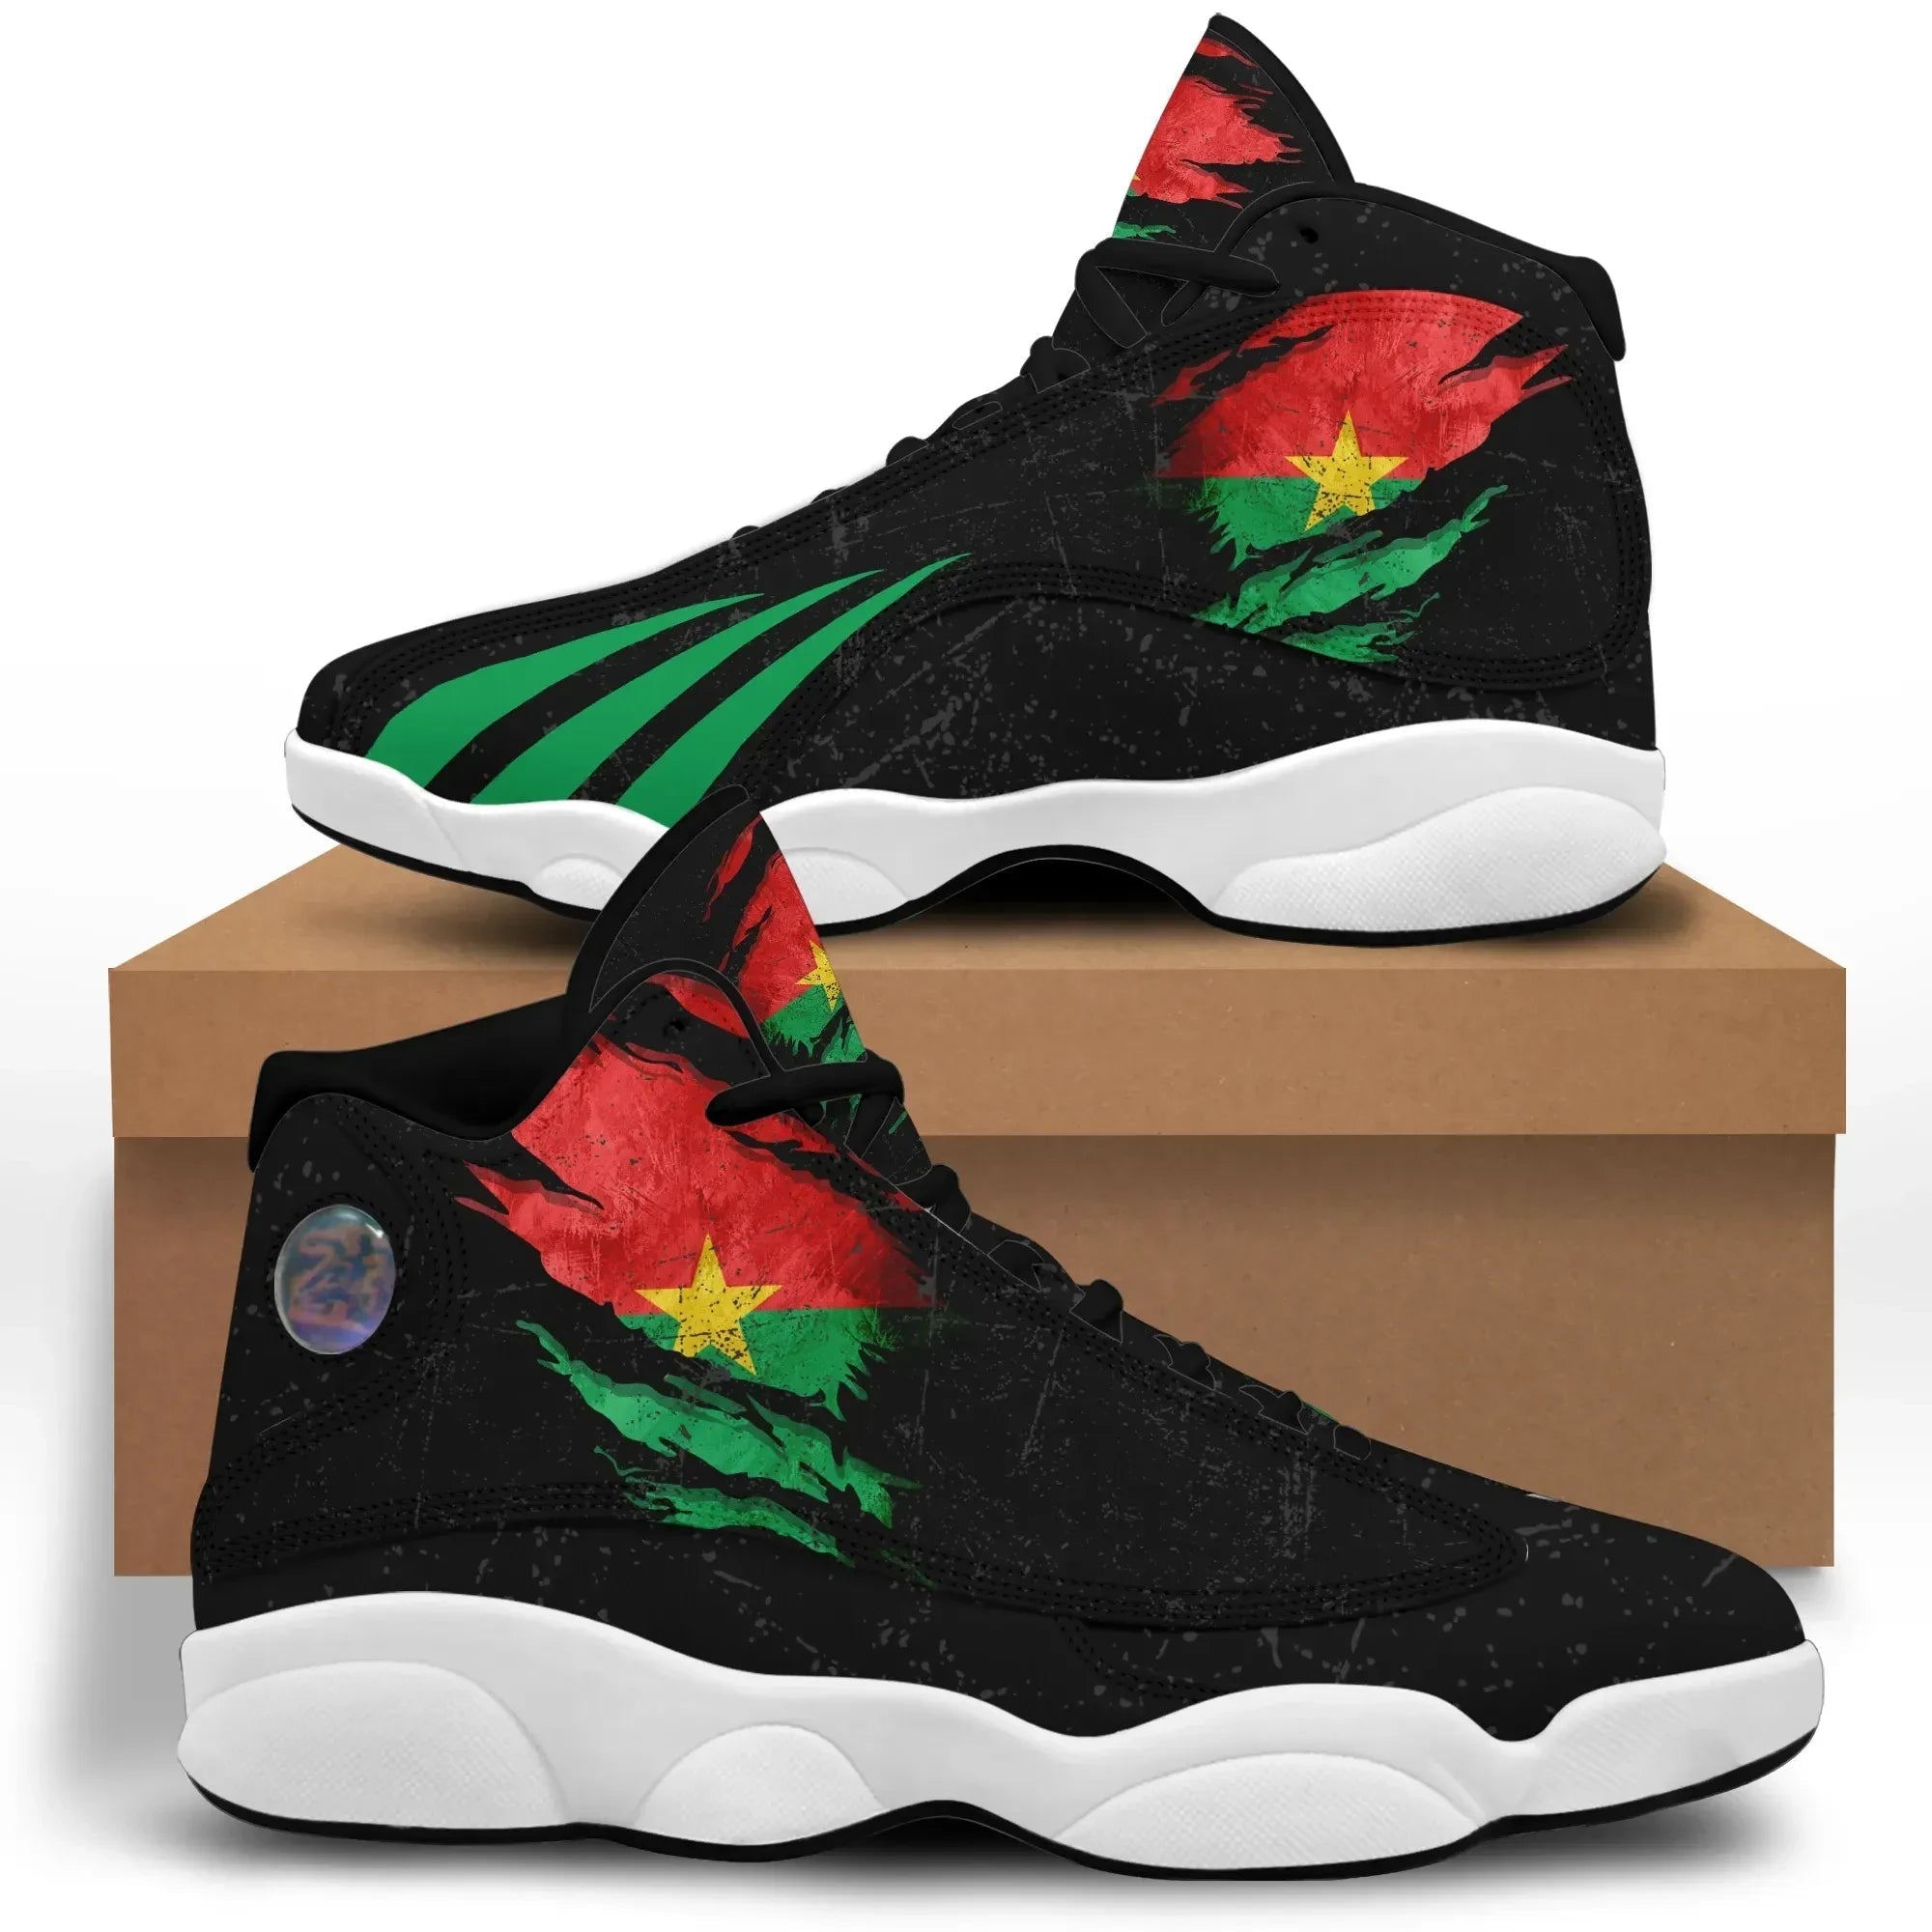 burkina-faso-in-me-high-top-sneakers-special-grunge-style